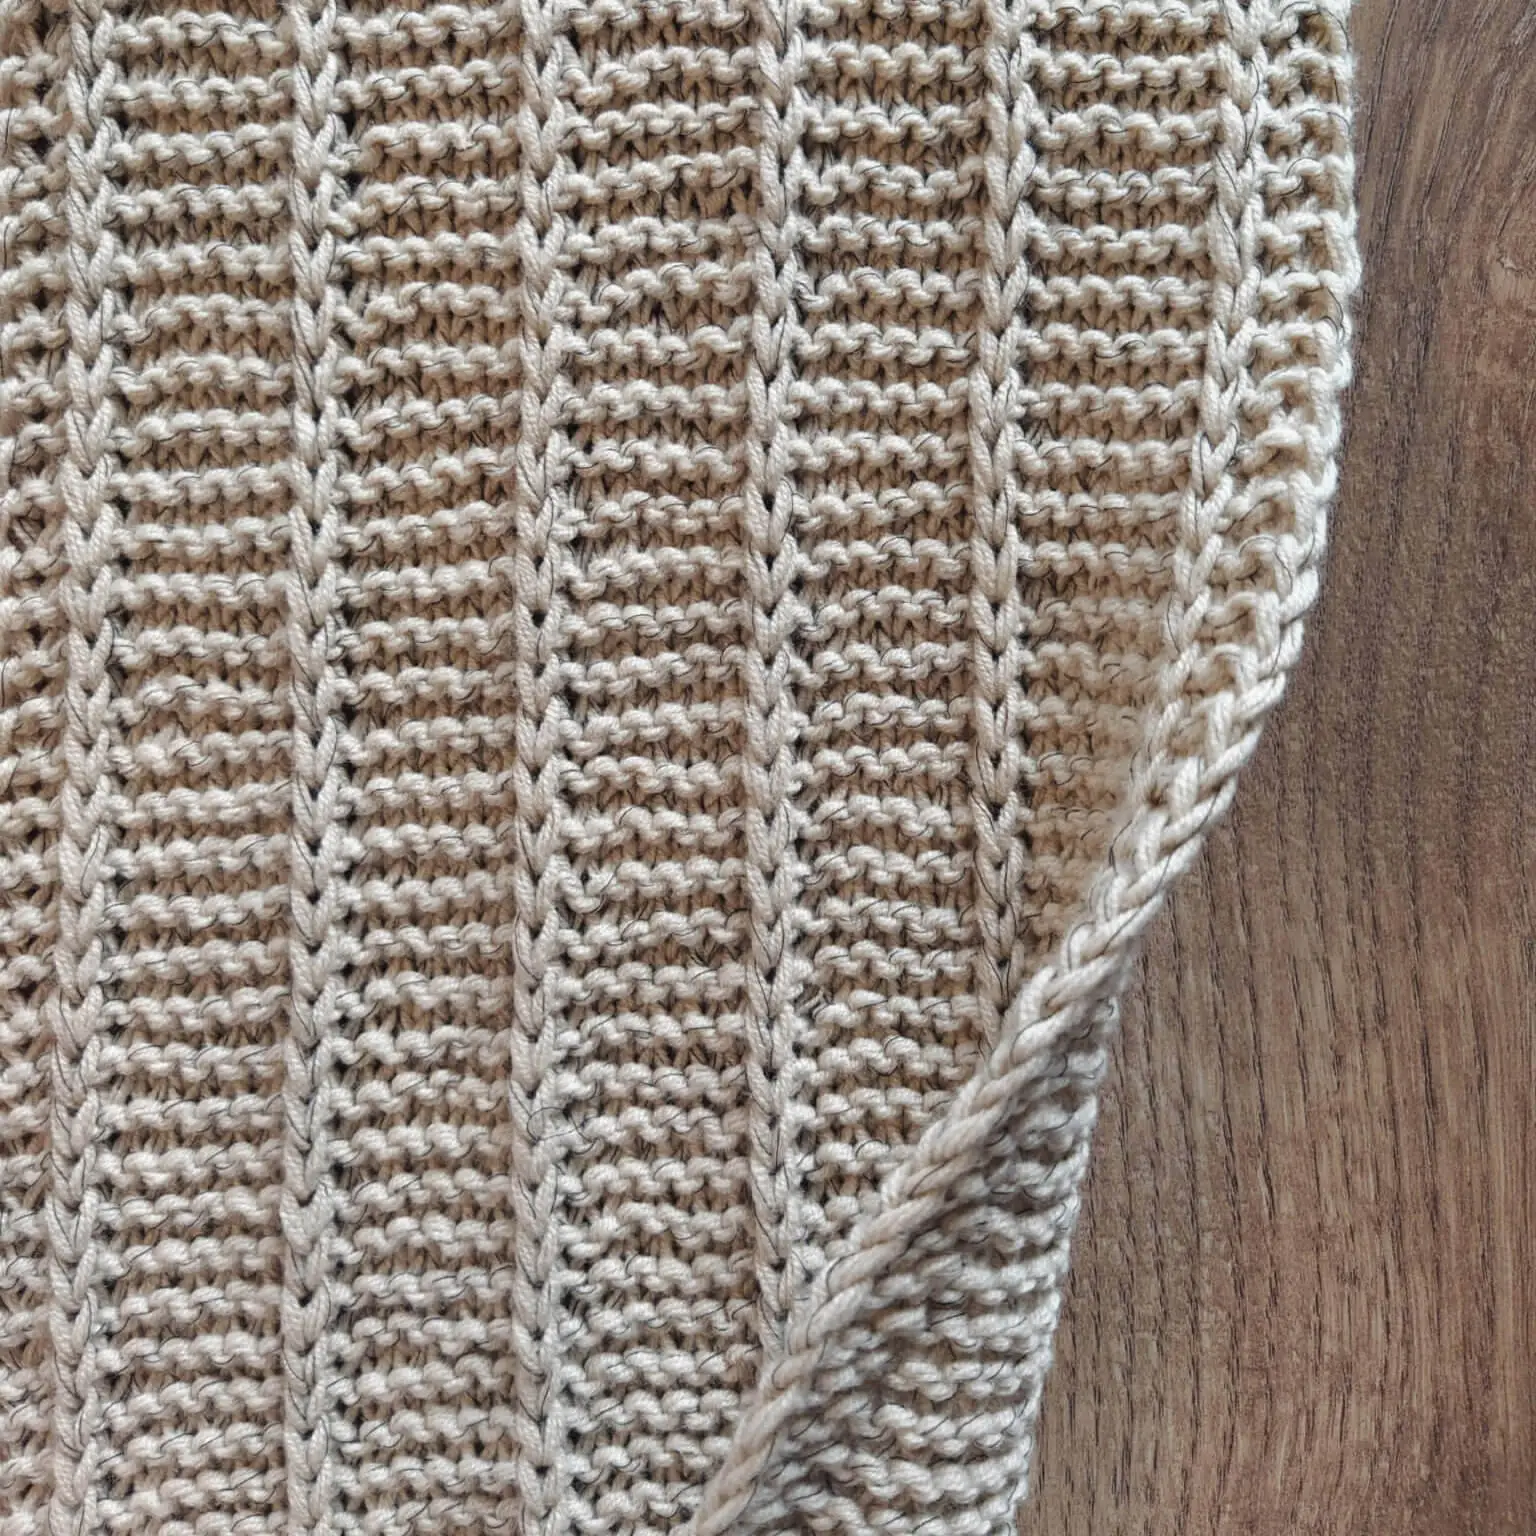 a close-up view of the slipped stitch border of the father-in-law scarf